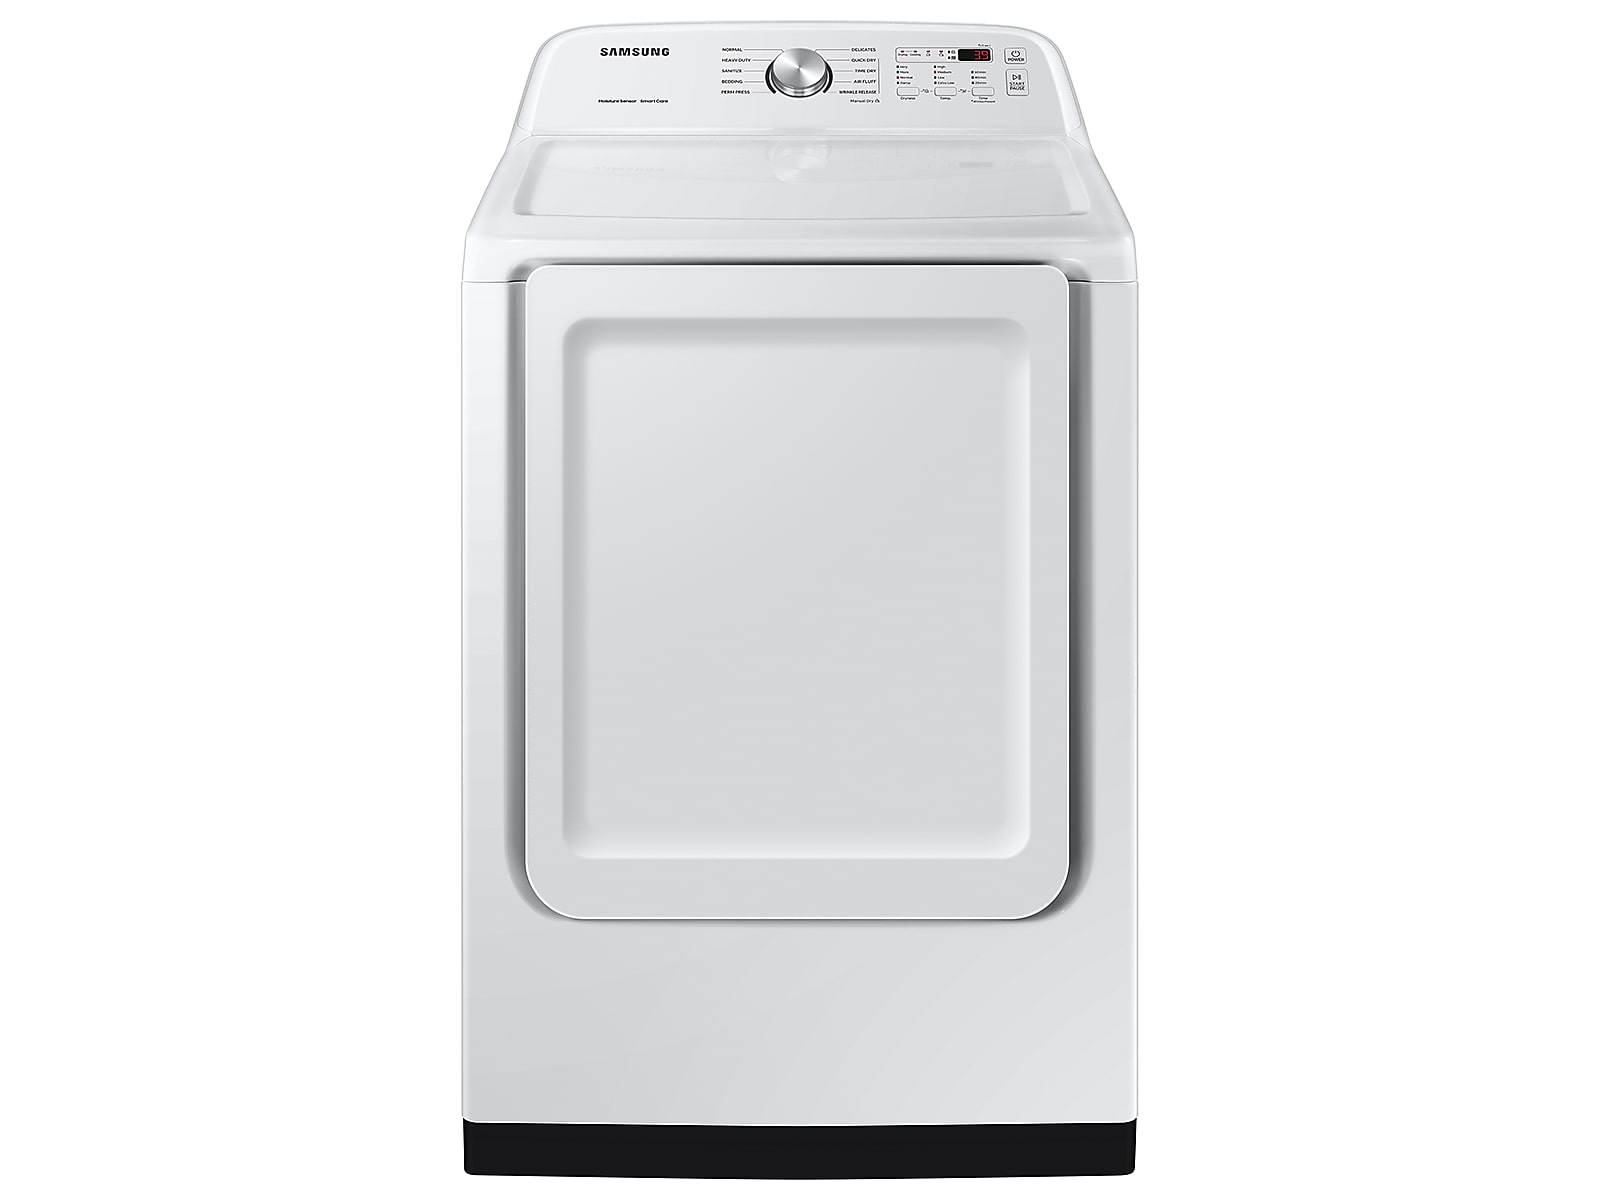 Samsung 7.4 cu. ft. Electric Dryer with Sensor Dry in White(DVE50B5100W/A3)